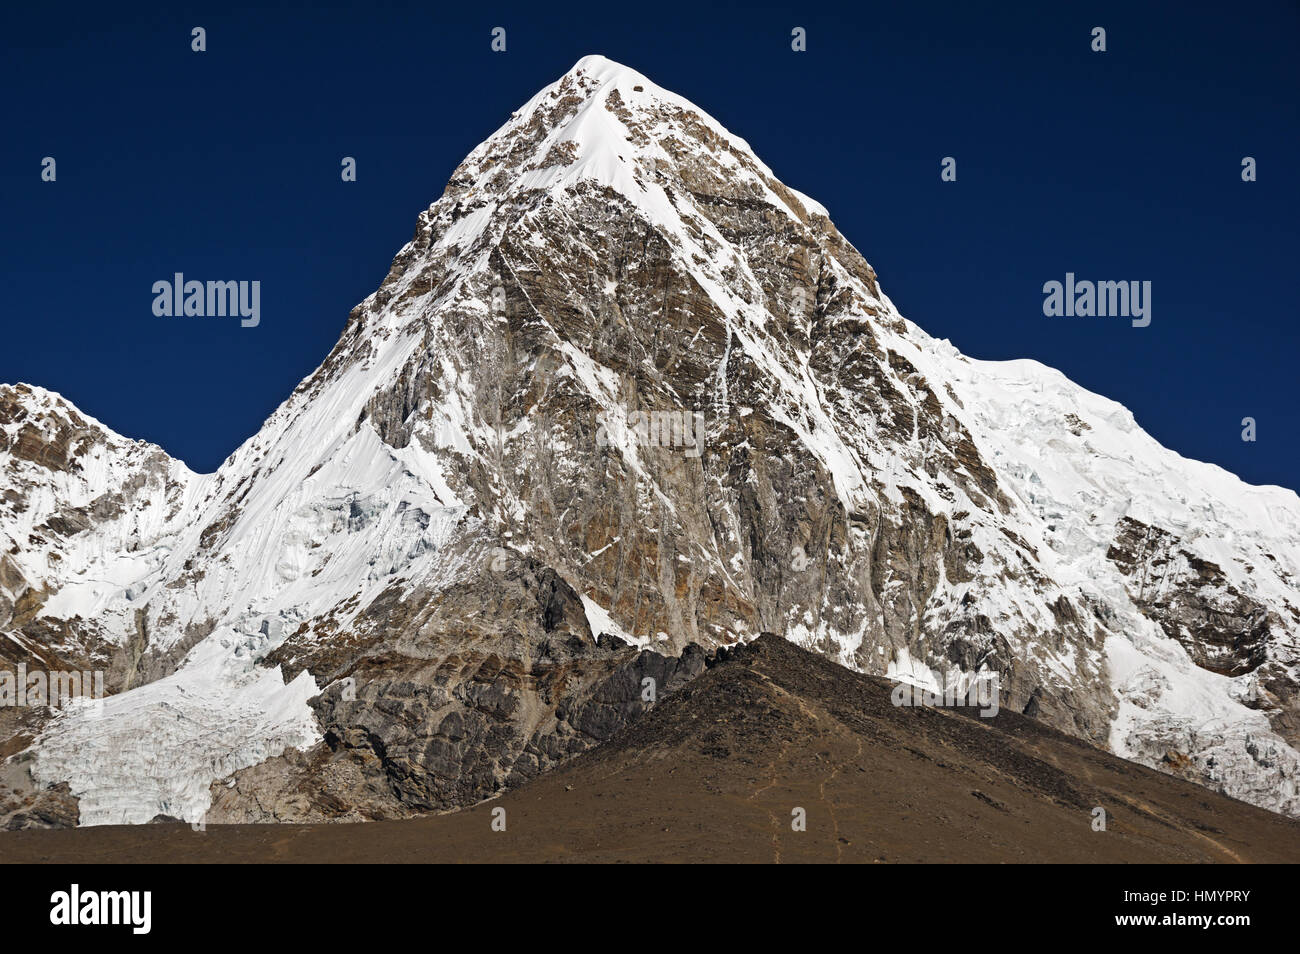 Pumori or Pumo Ri a 7161 meter mountain in the Everest region of the Himalaya with Kala Patthar below it Stock Photo